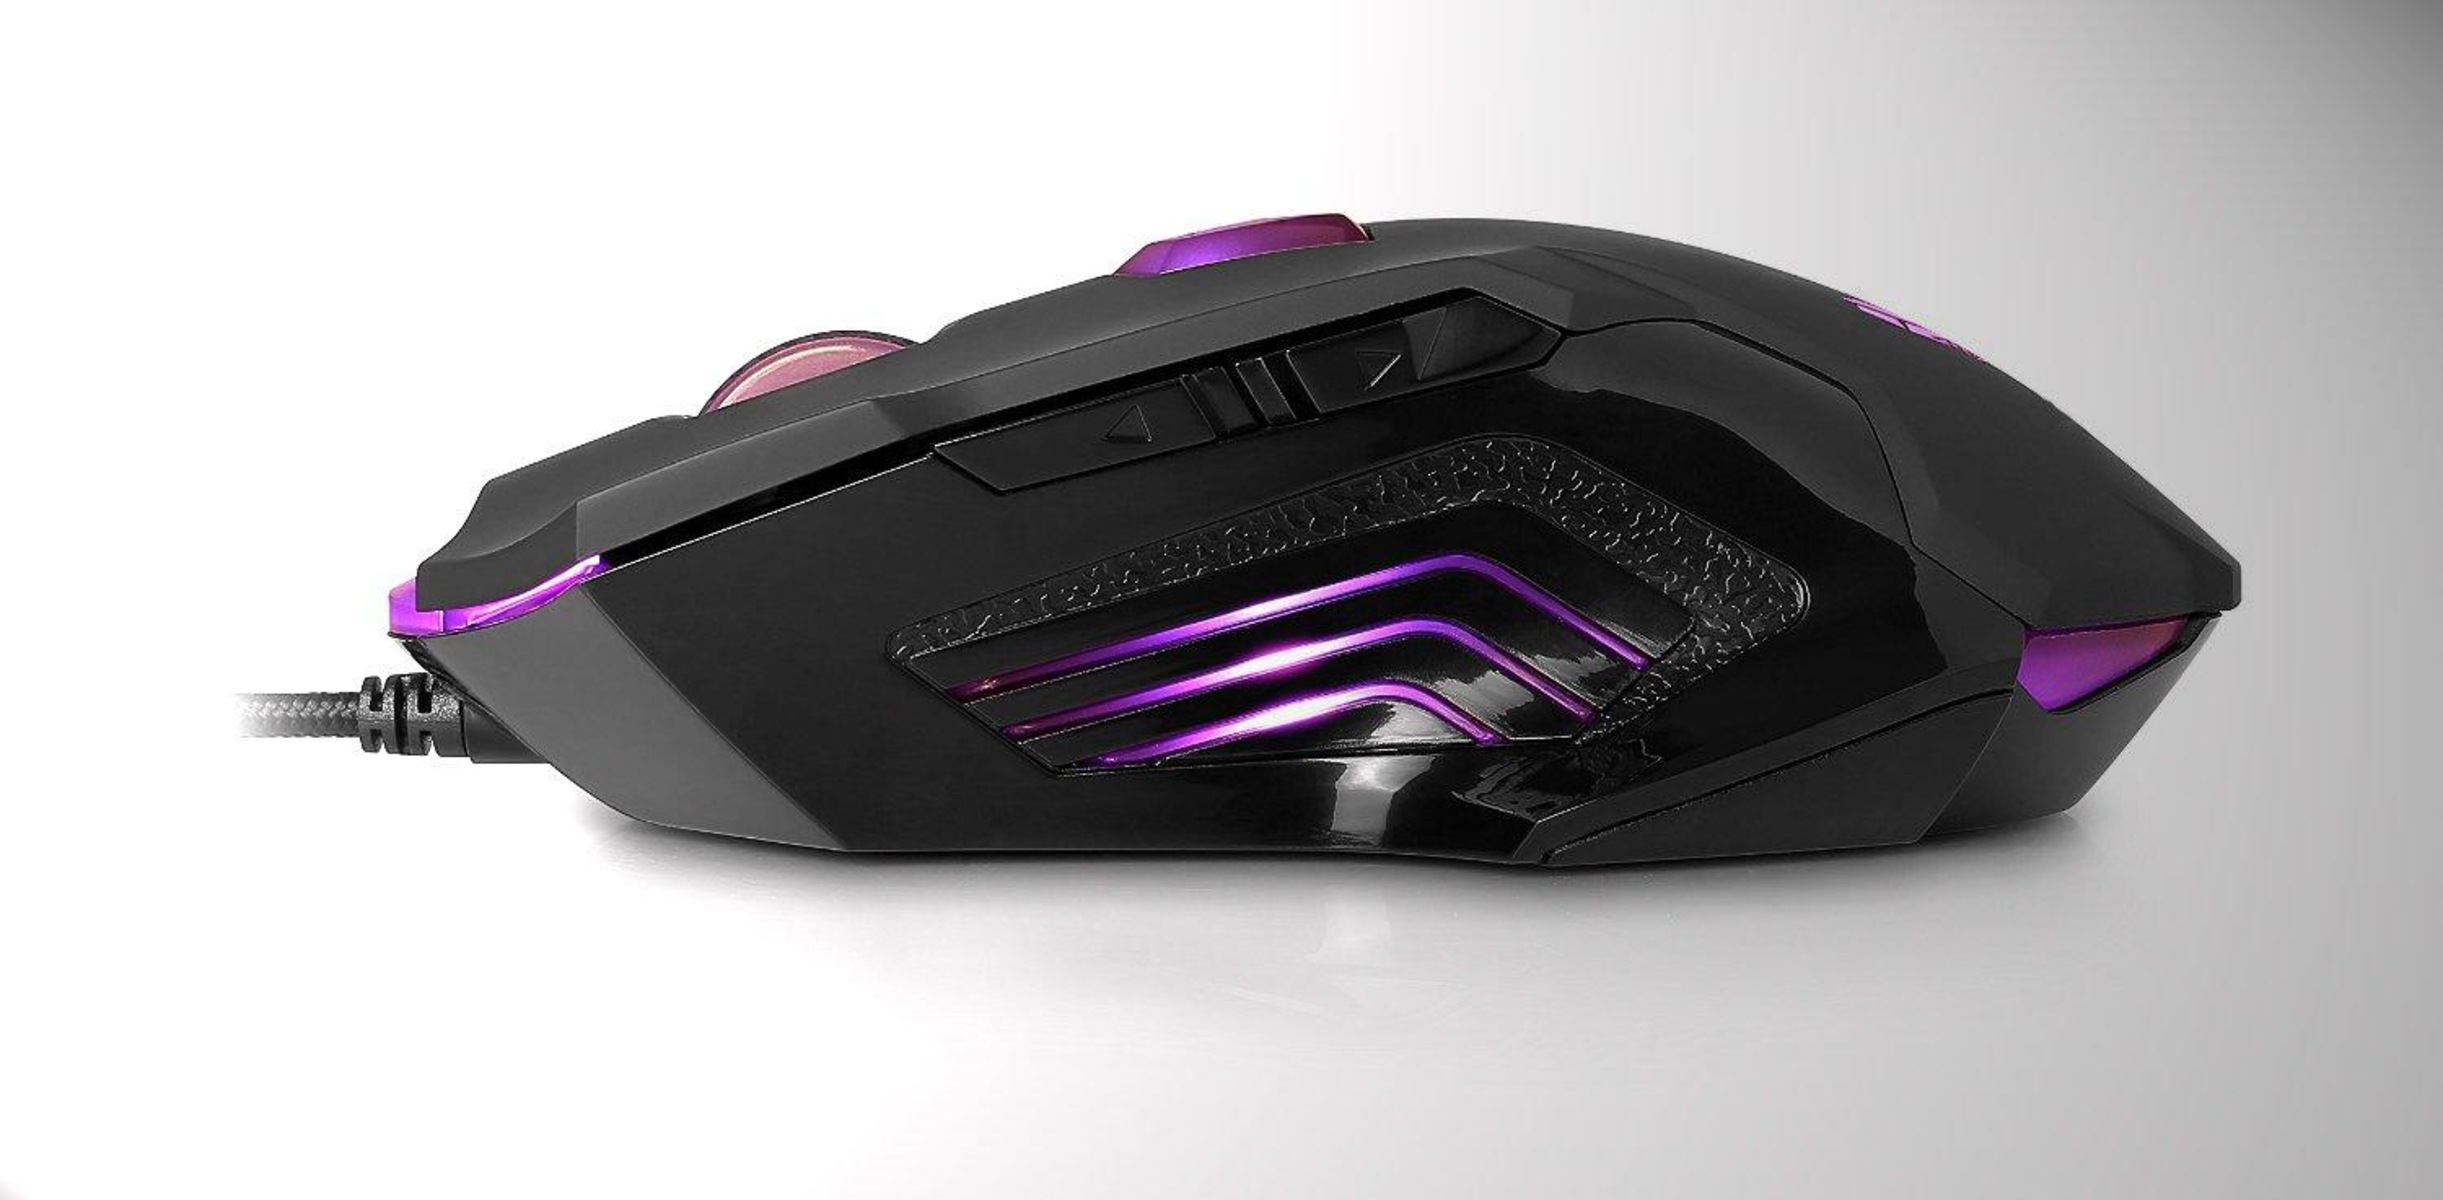 JTD Gaming Mouse: How Do I Turn Down The Sensitivity?